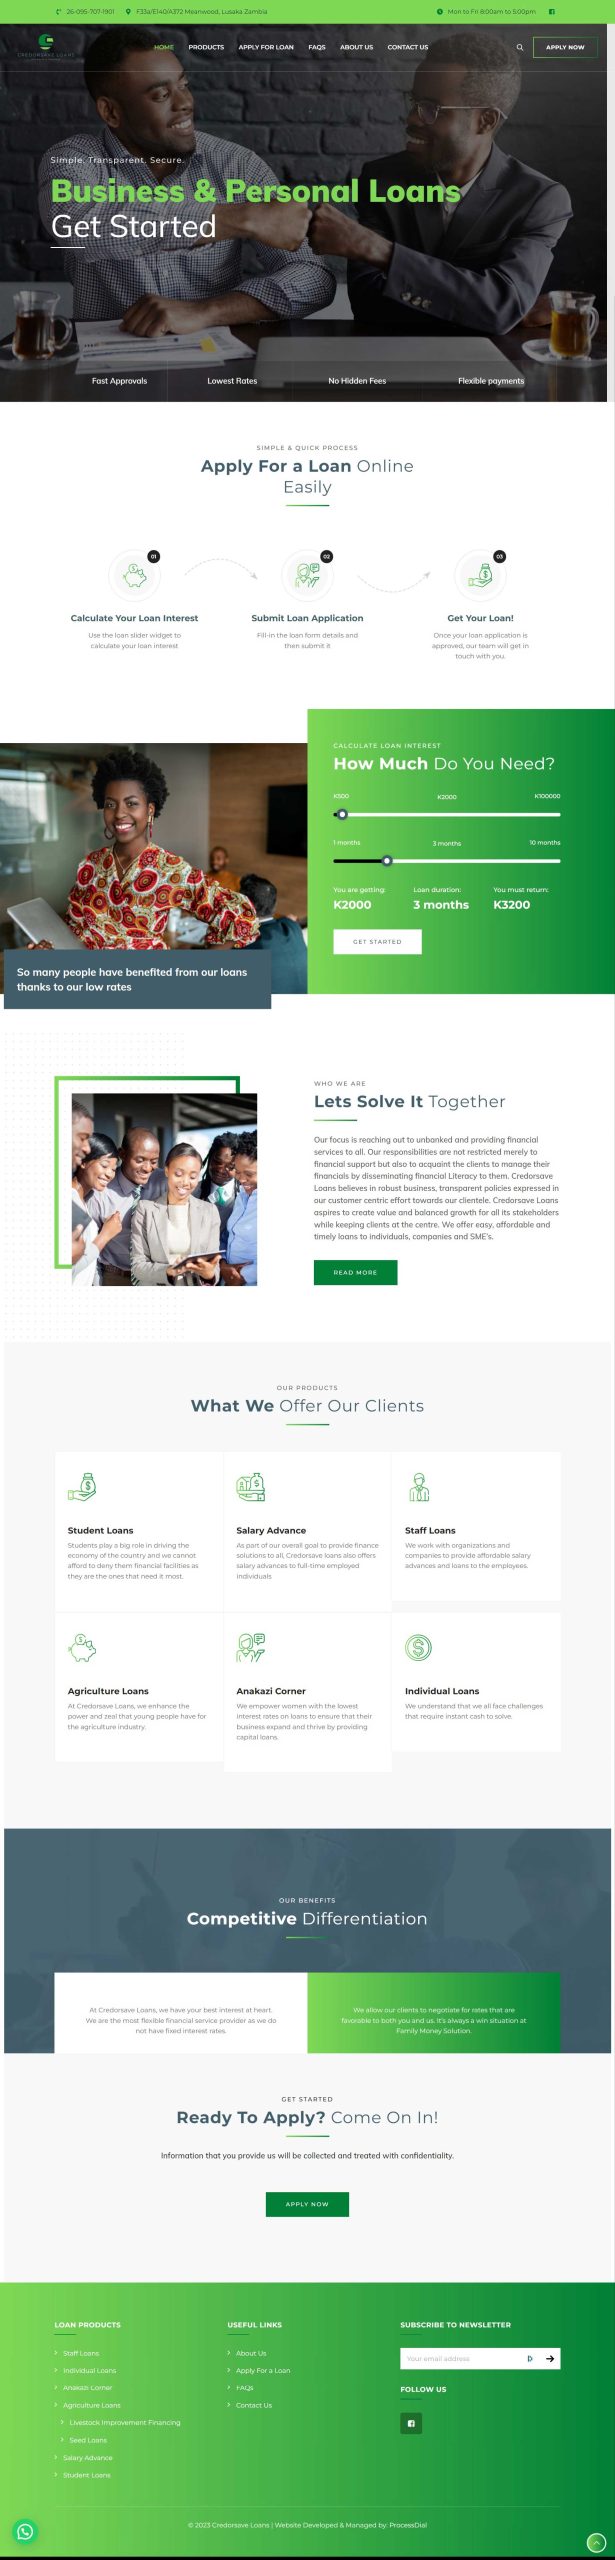 Credorsave-Loans-Full-Page